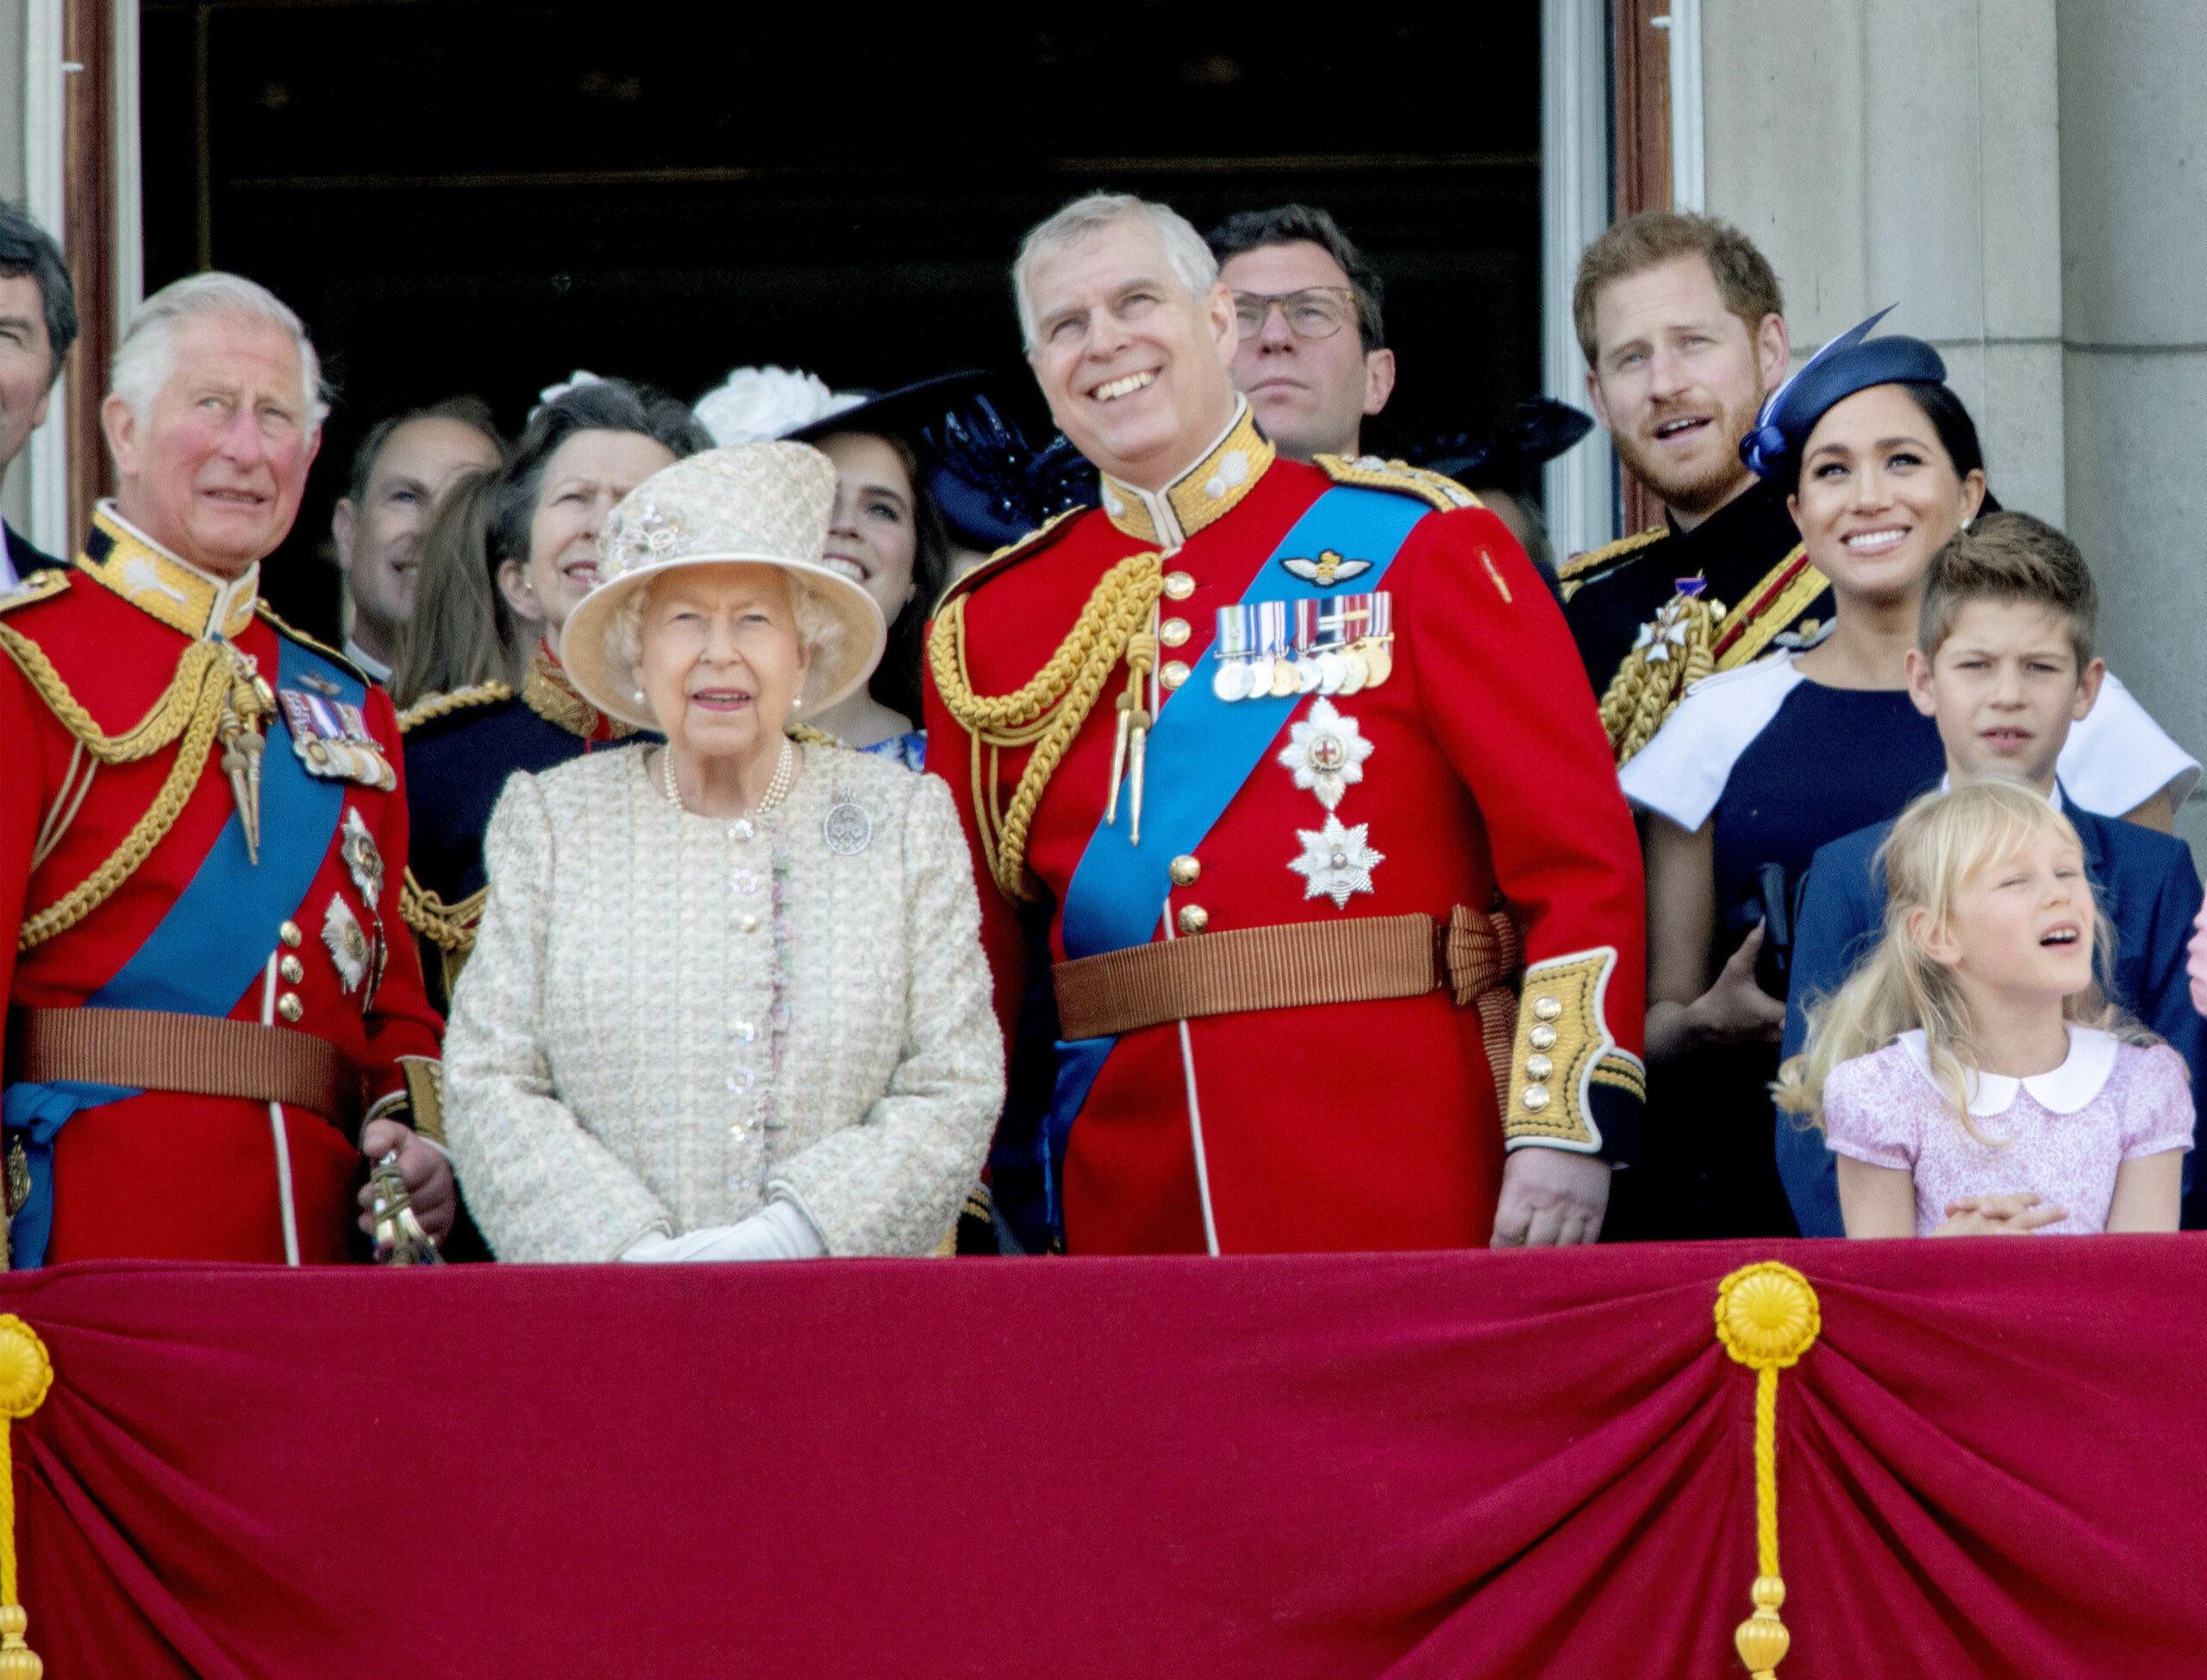 08-06-2019 England The ceremony of the Trooping the Colour, marking the monarch's official birthday, in London. Queen Elizabeth II Camilla, Duchess of Cornwall, Vice Admiral Timothy Laurence, Prince Charles, Prince of Wales Prince Andrew Britain's Princess Beatrice of York Britain's Princess Anne, Princess Royal, Queen Elizabeth II Princess Eugenie of York Lady Louise Windsor, Prince Andrew, Duke of York Prince Harry, Duke of Sussex, Meghan, Duchess of Sussex